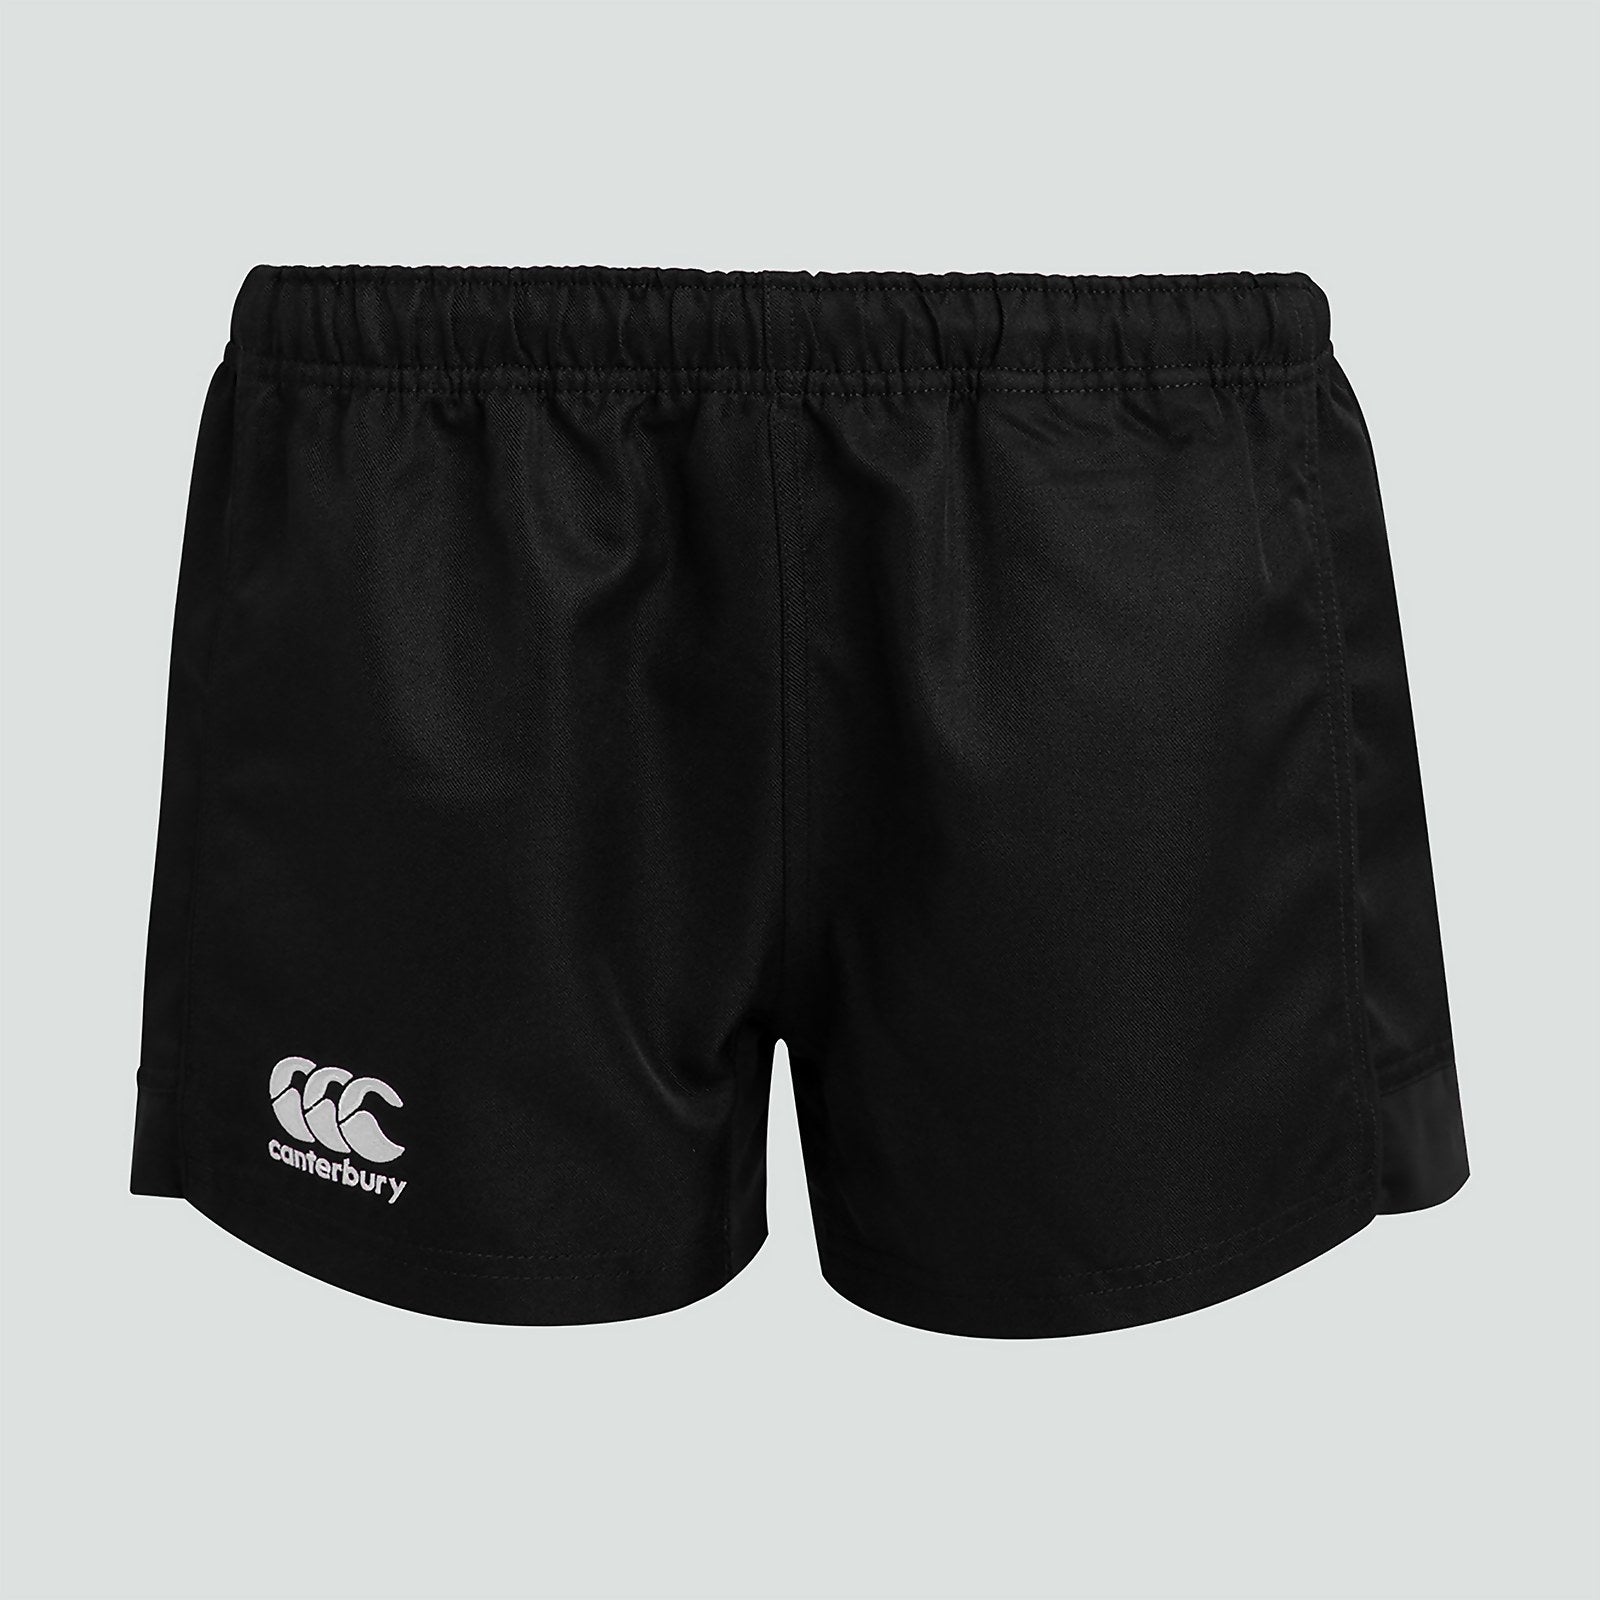 Old Cresecent RFC Womens Rugby Playing Canterbury Advantage Short